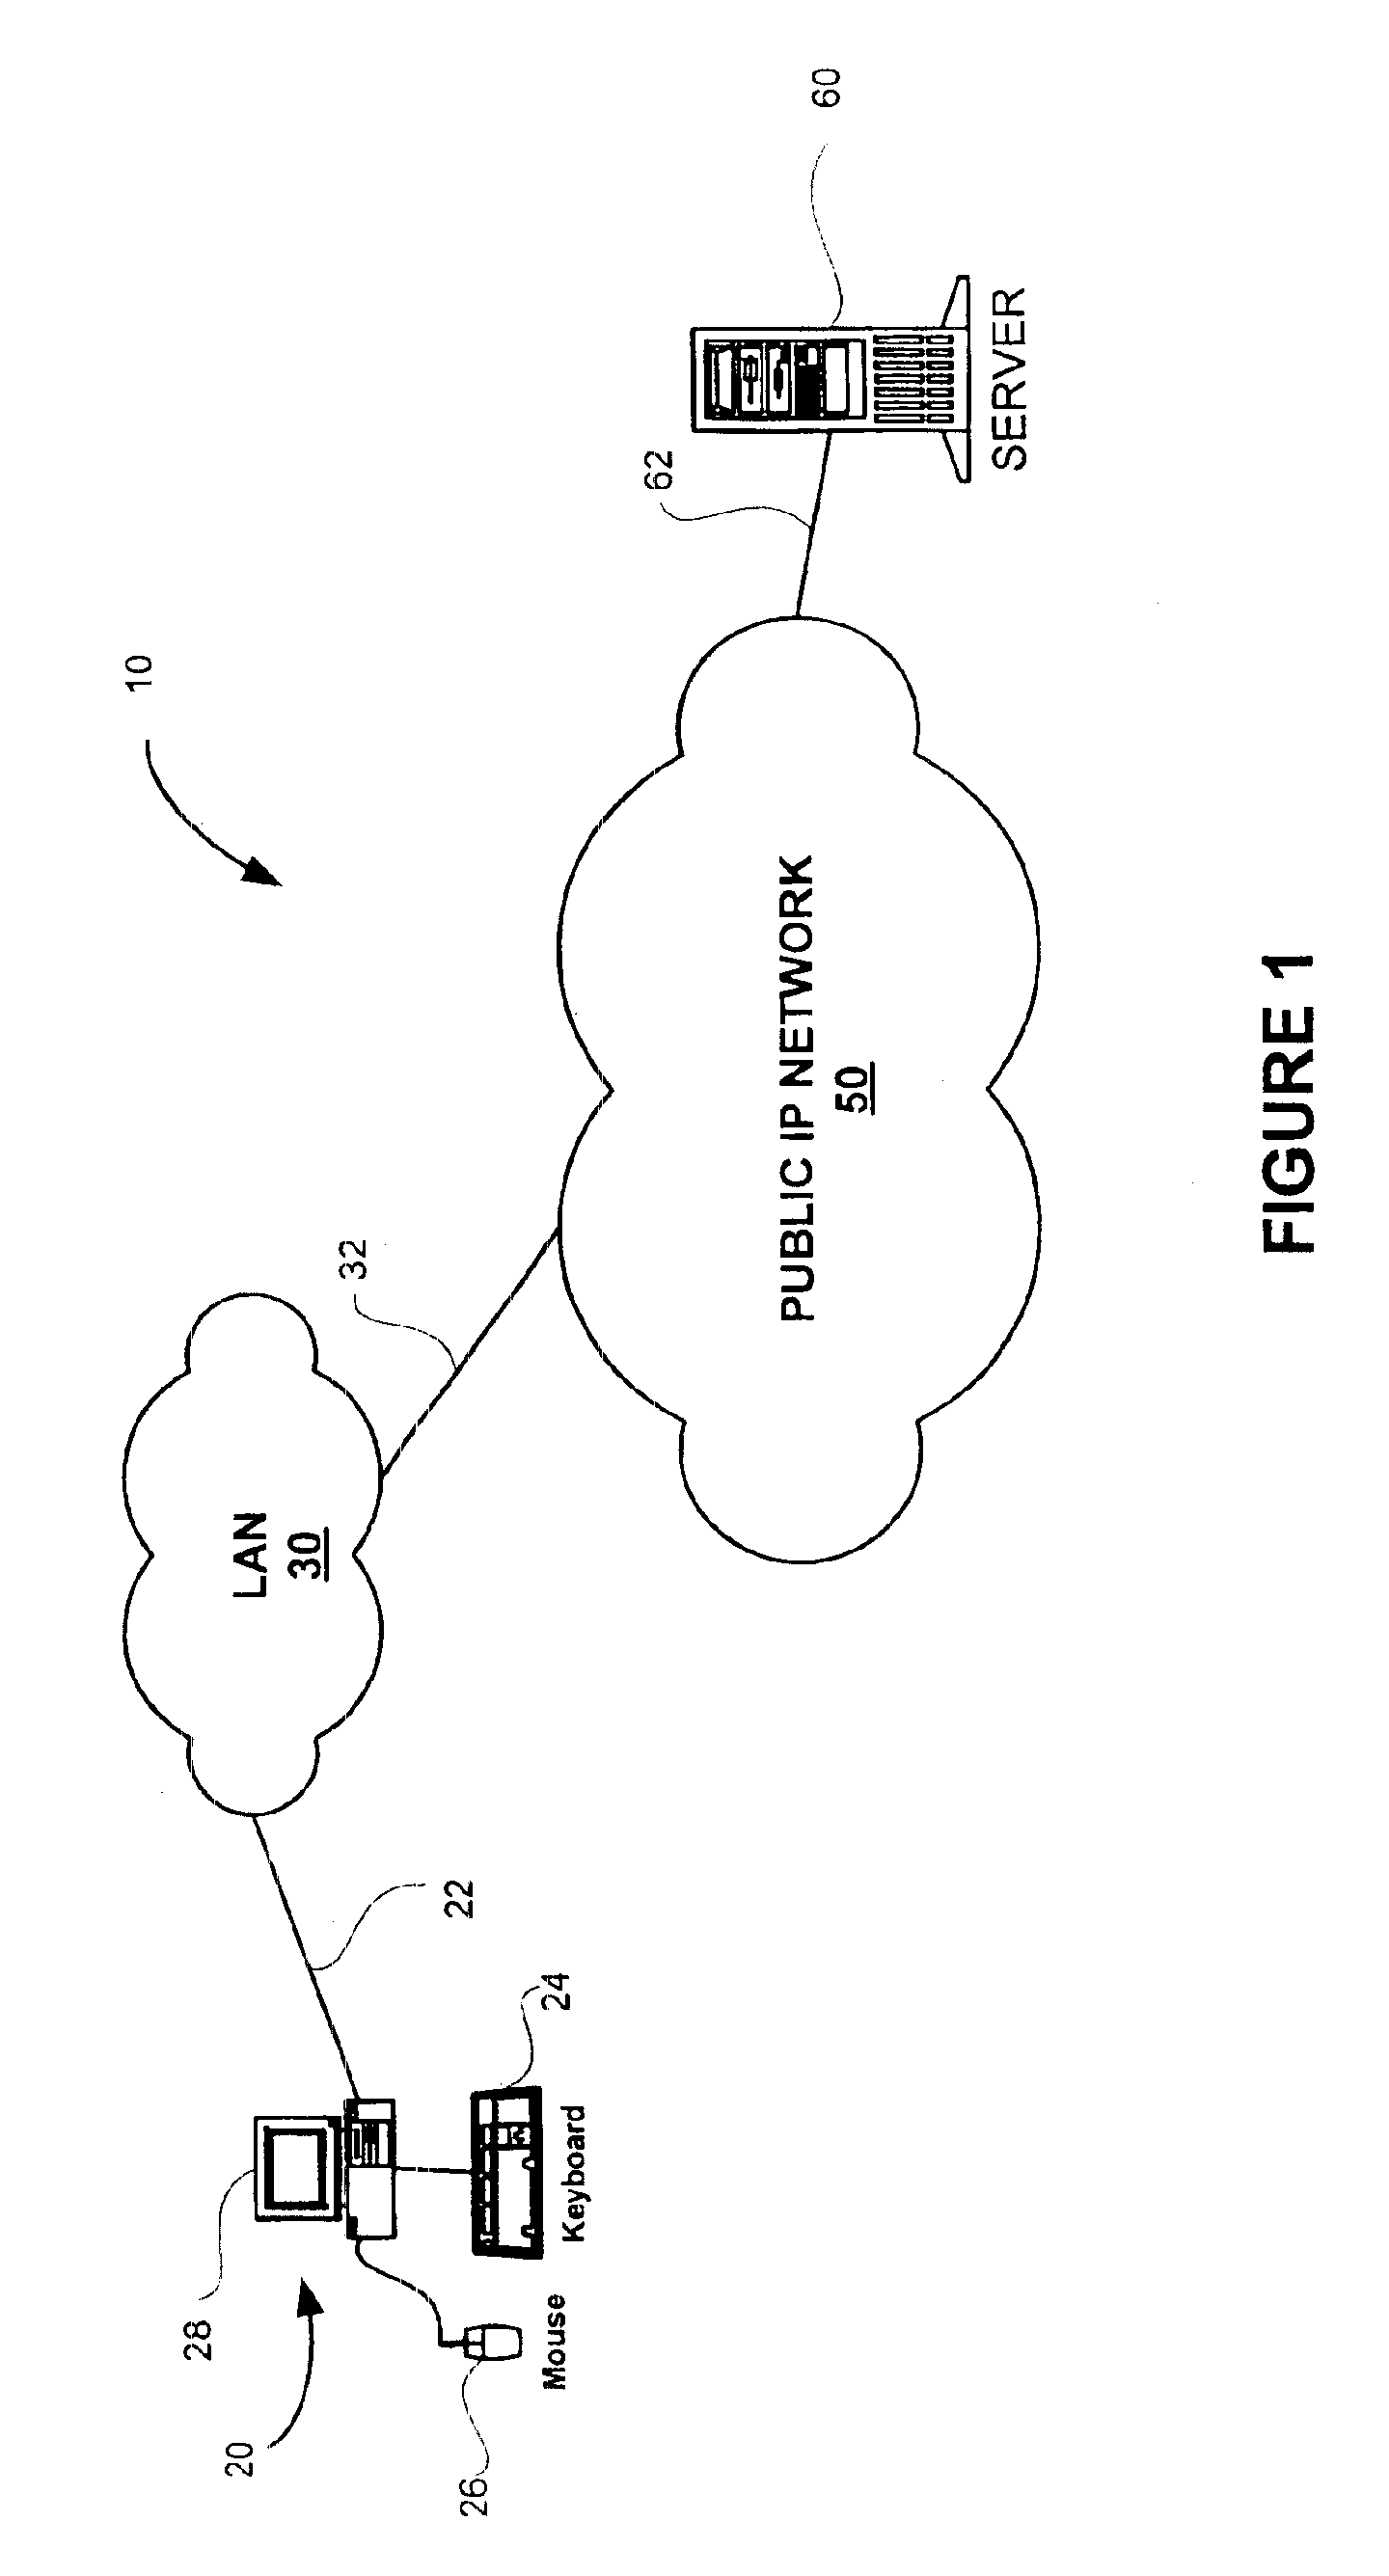 Method and apparatus for sharing common data objects among multiple applications in a client device